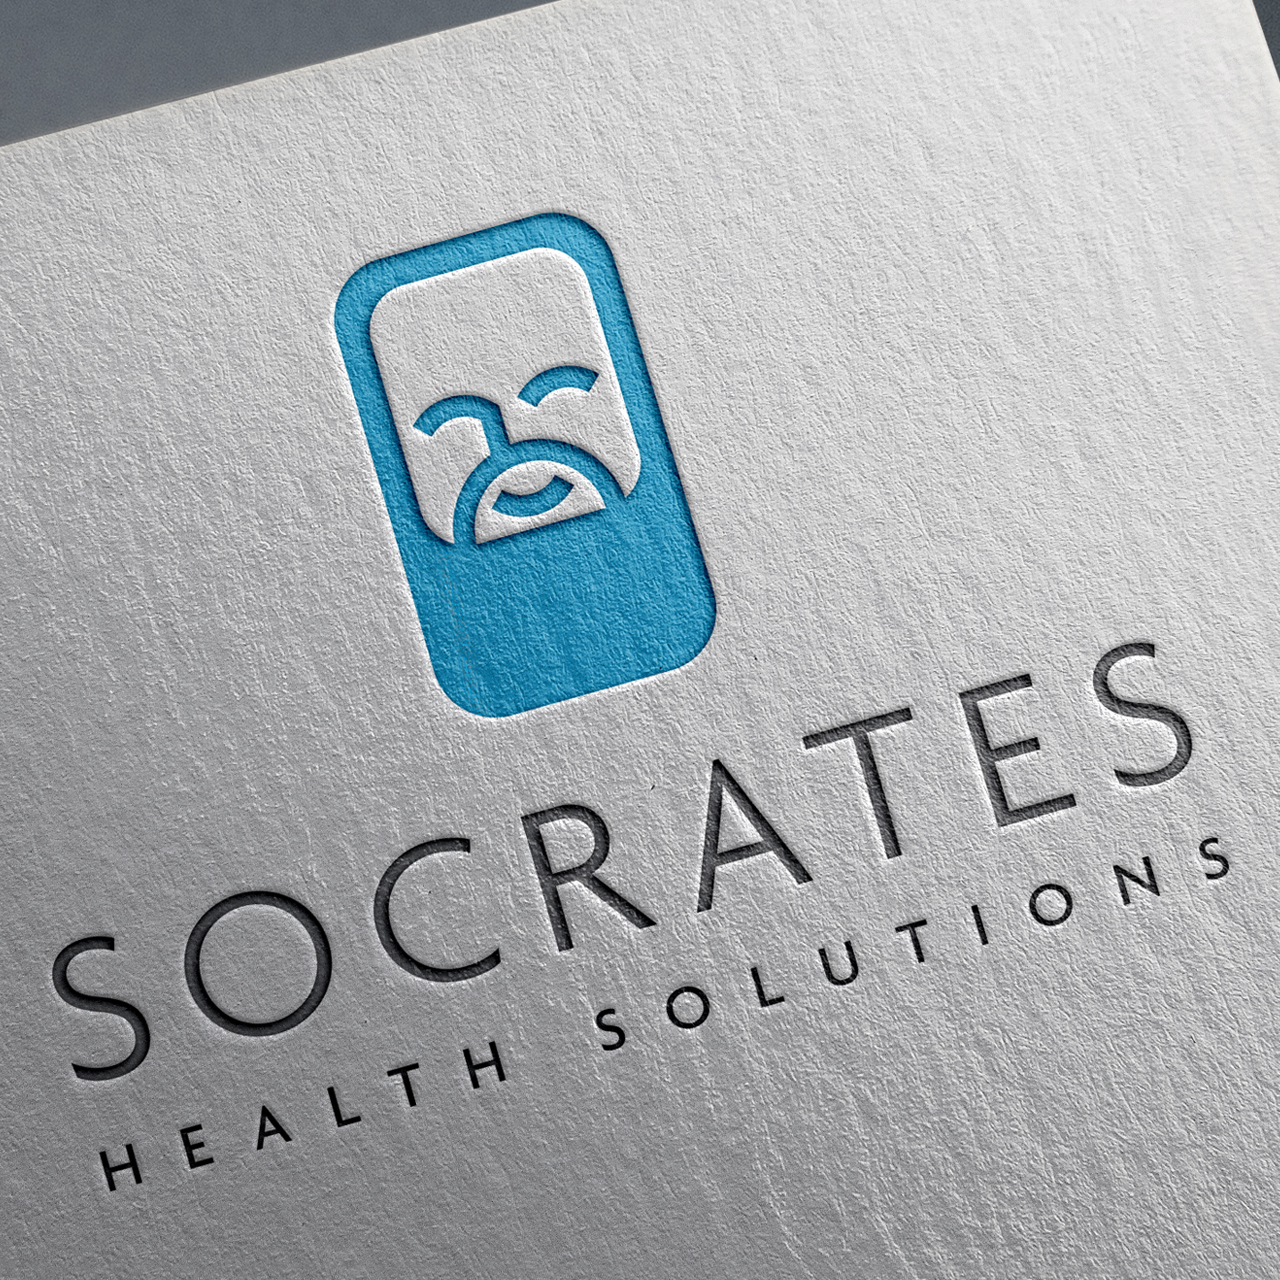 A close-up image of the Socrates Health Solution logo embossed on letterhead